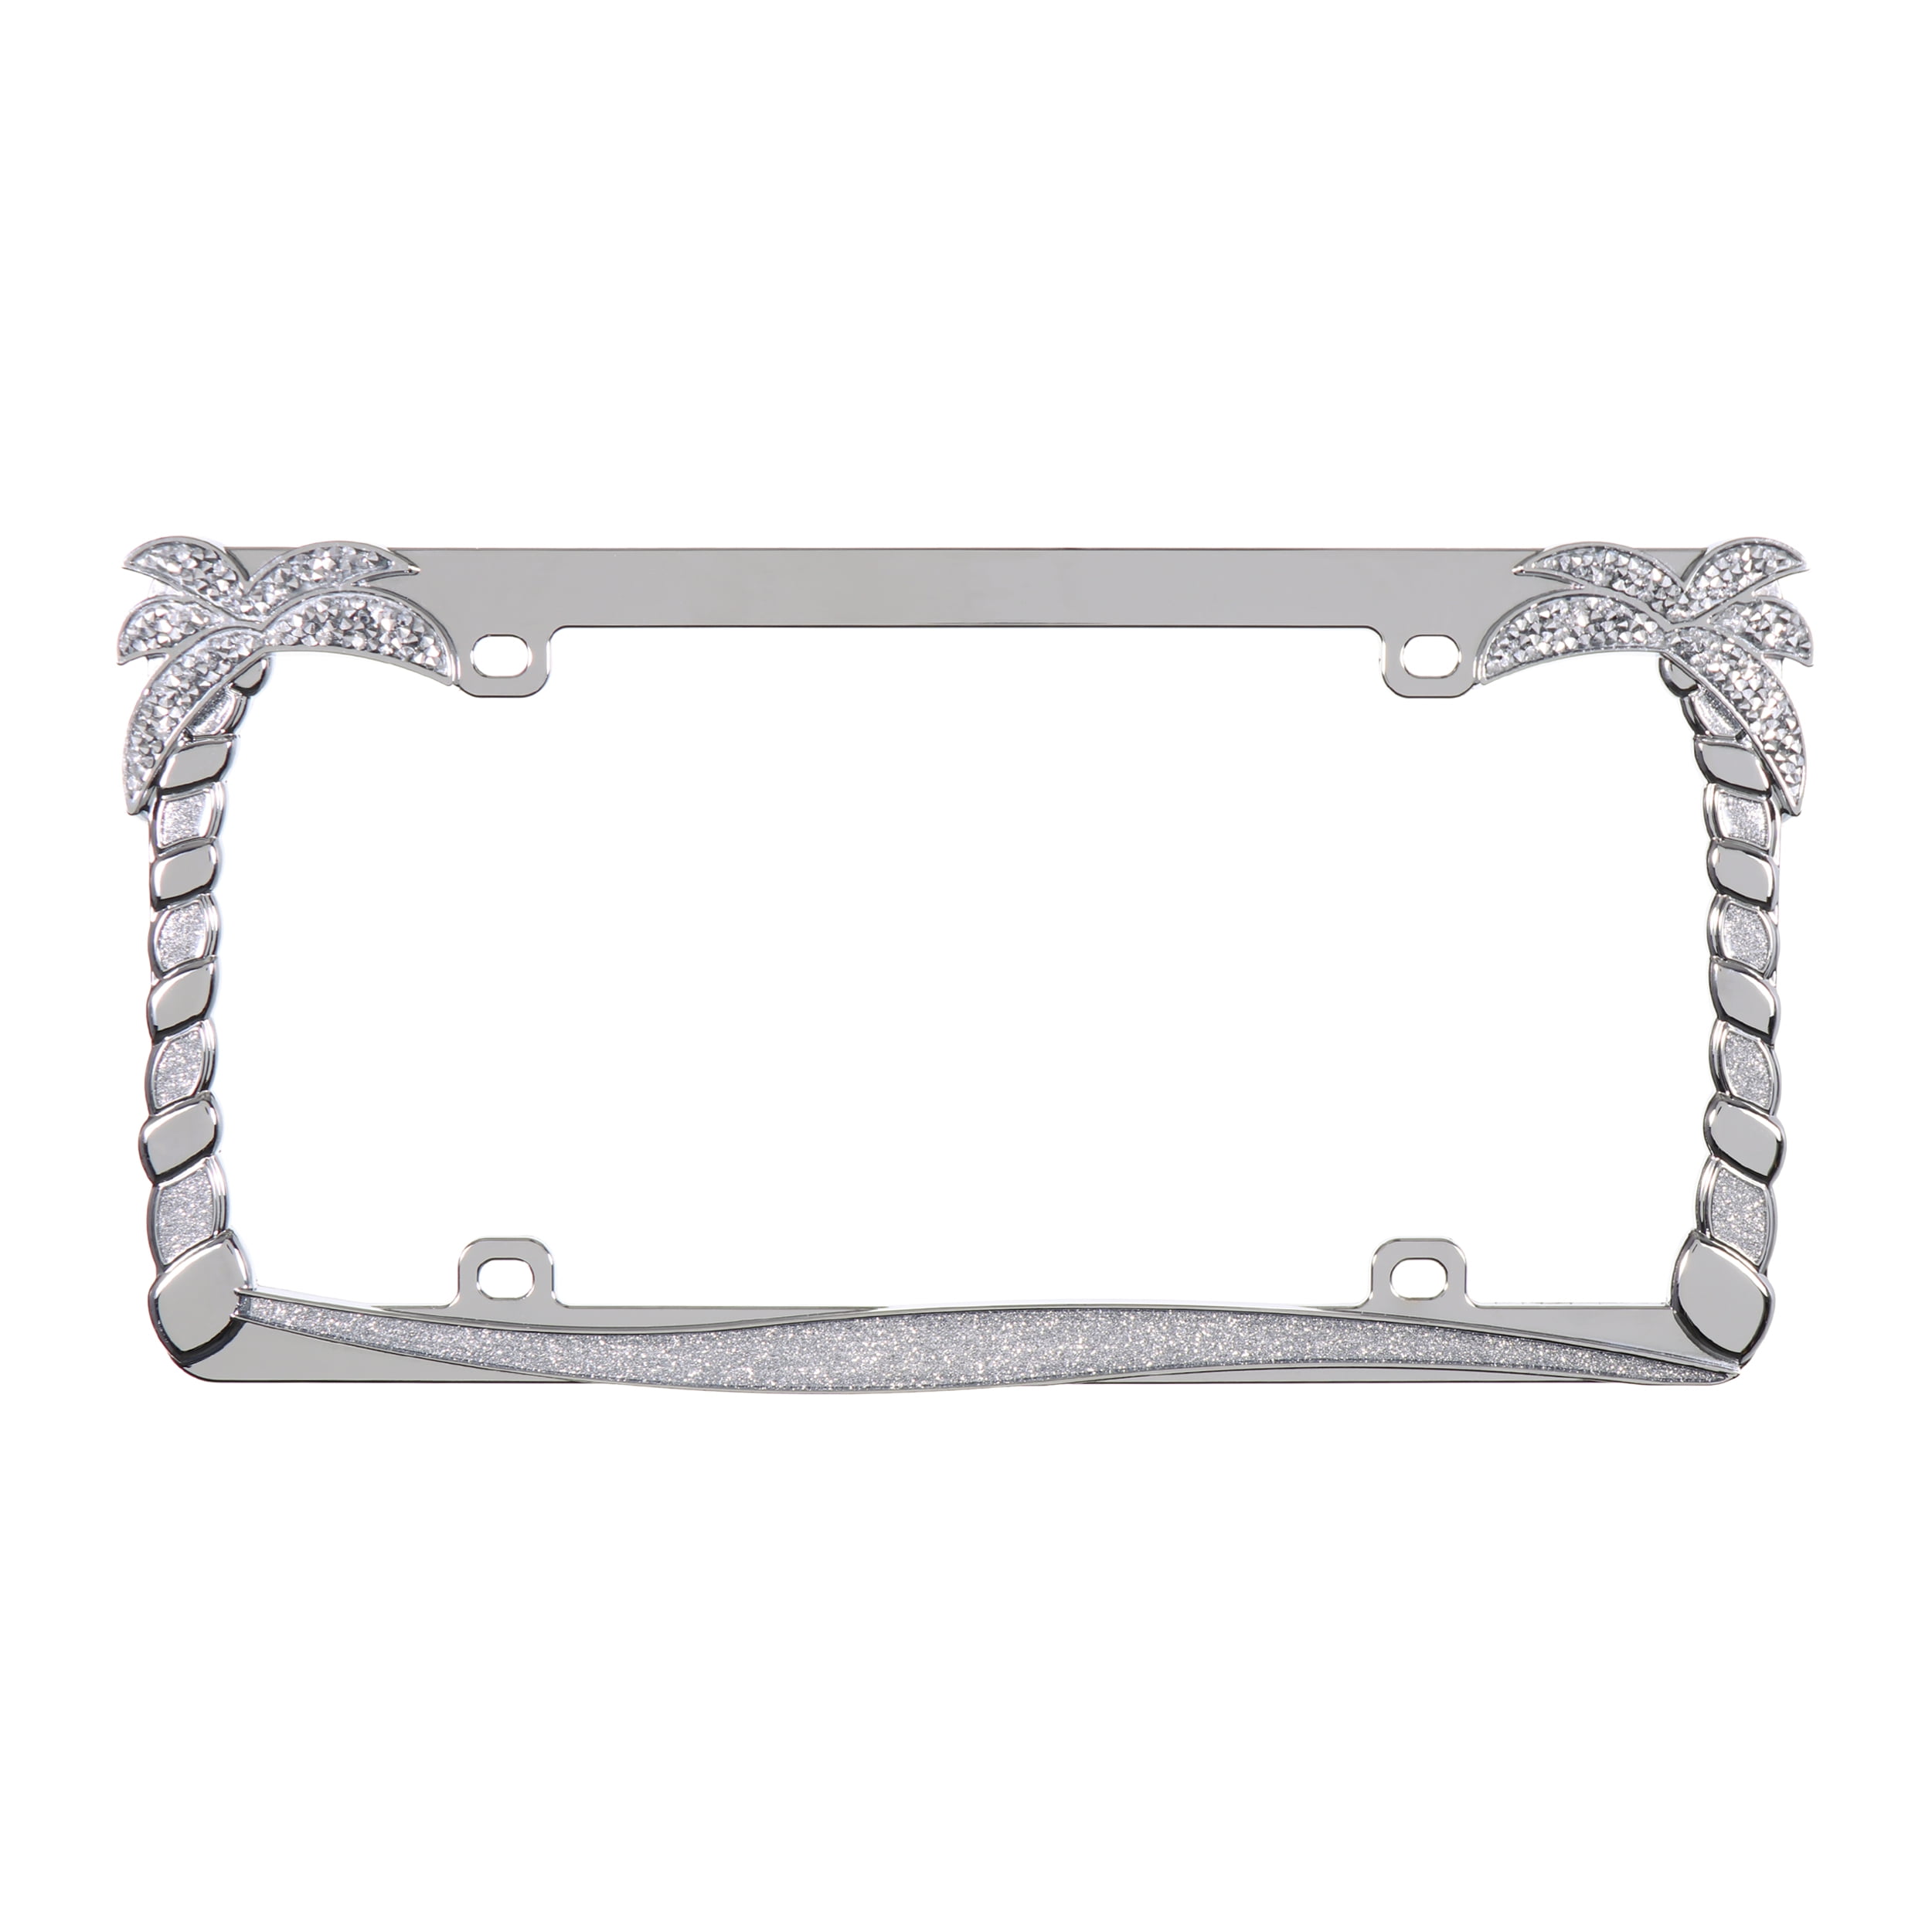 2 Vestian Camry Car Chrome Silver License Plate Frame Cover Holder with Caps Screws Rust Free Stainless Steel